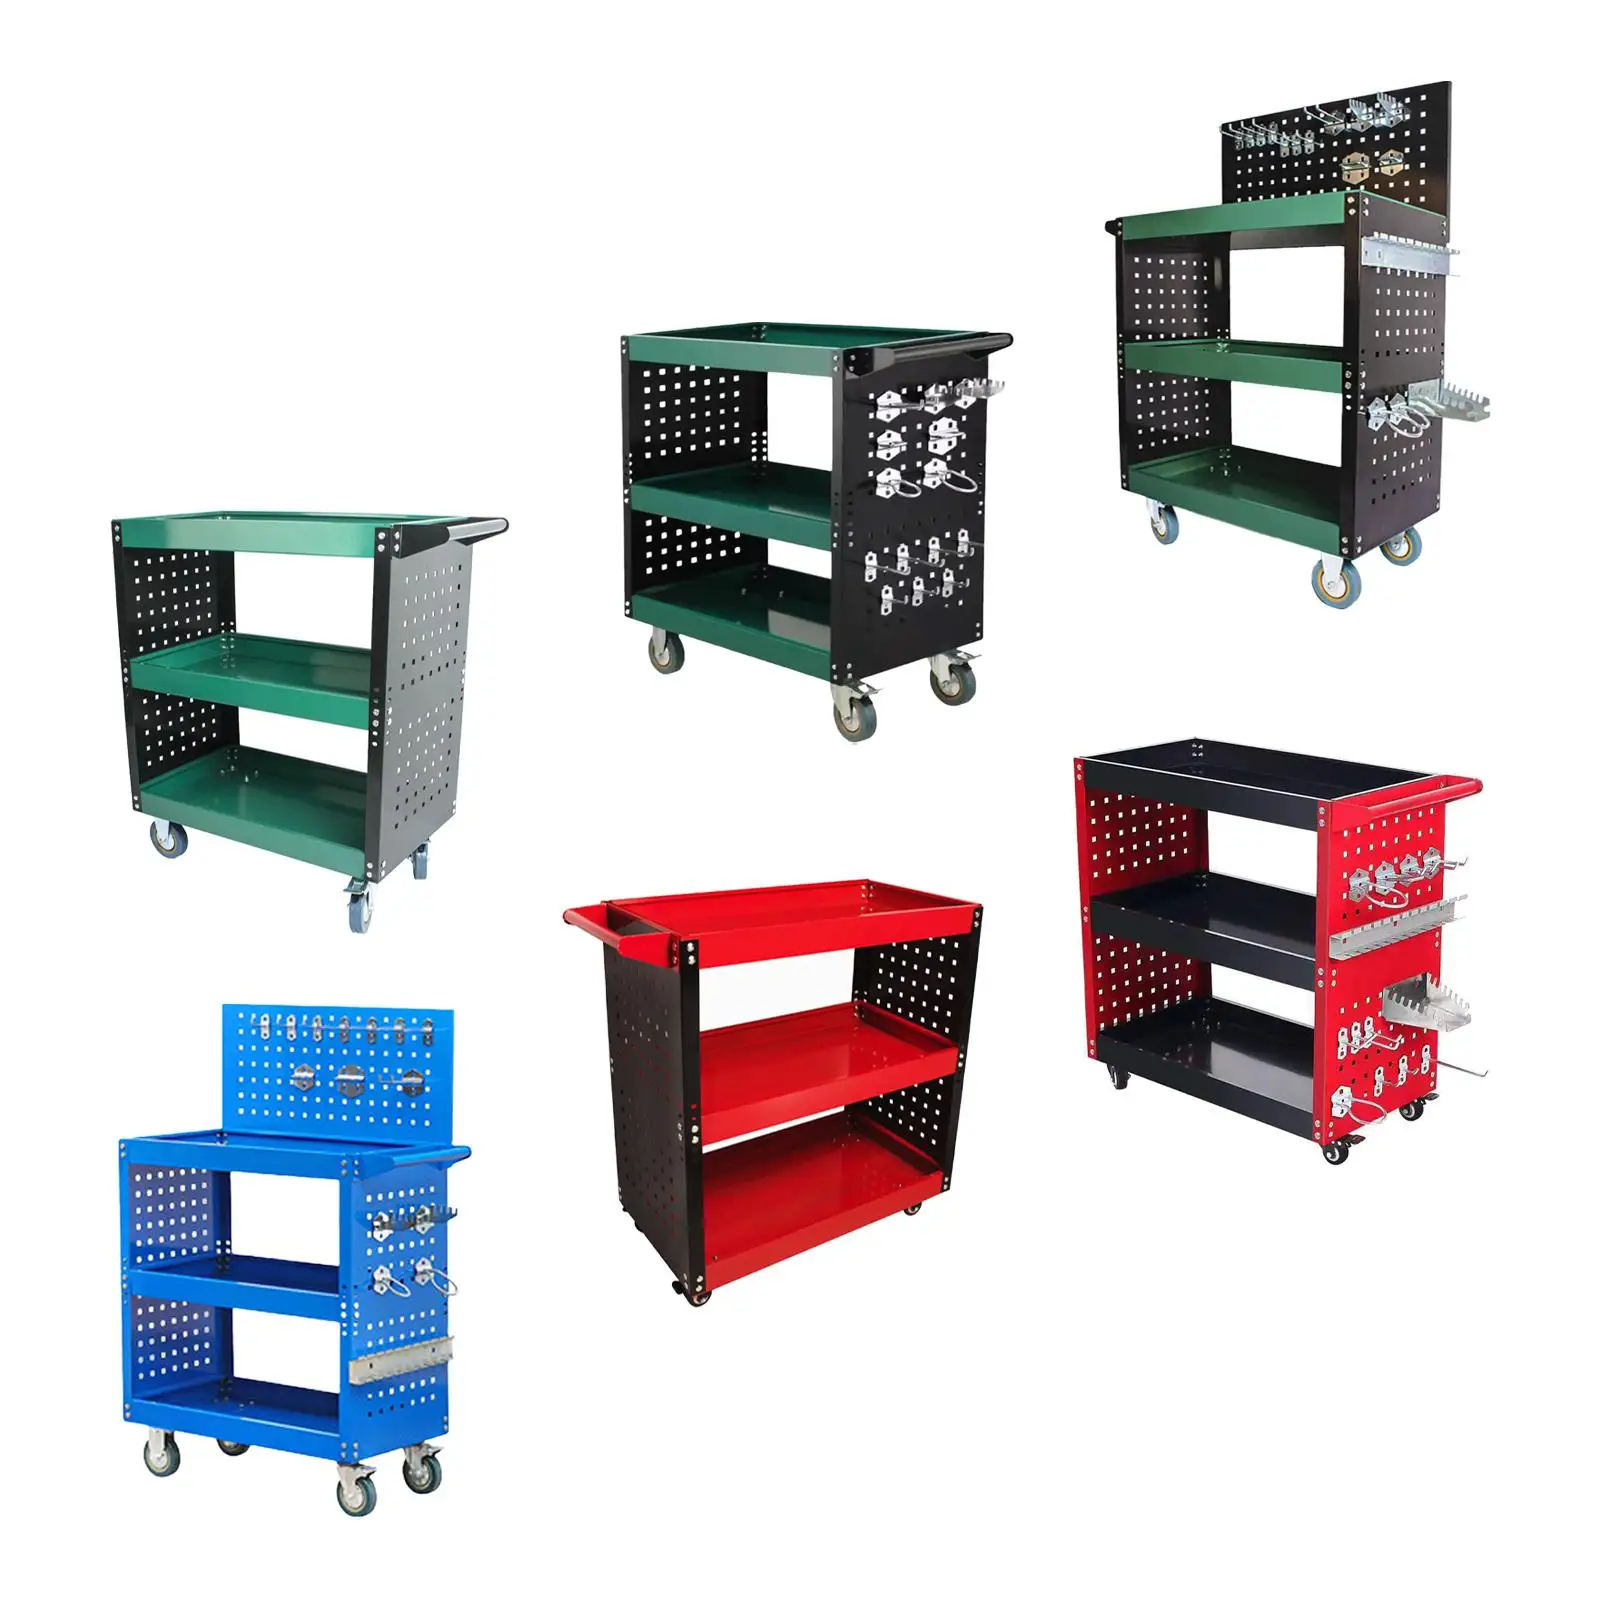 

Heavy Duty 3 Tier Mechanic Tool Cart Workshop Hardware Mobile Utility Rolling Cart with Shelves for Auto Repair Studio Warehouse